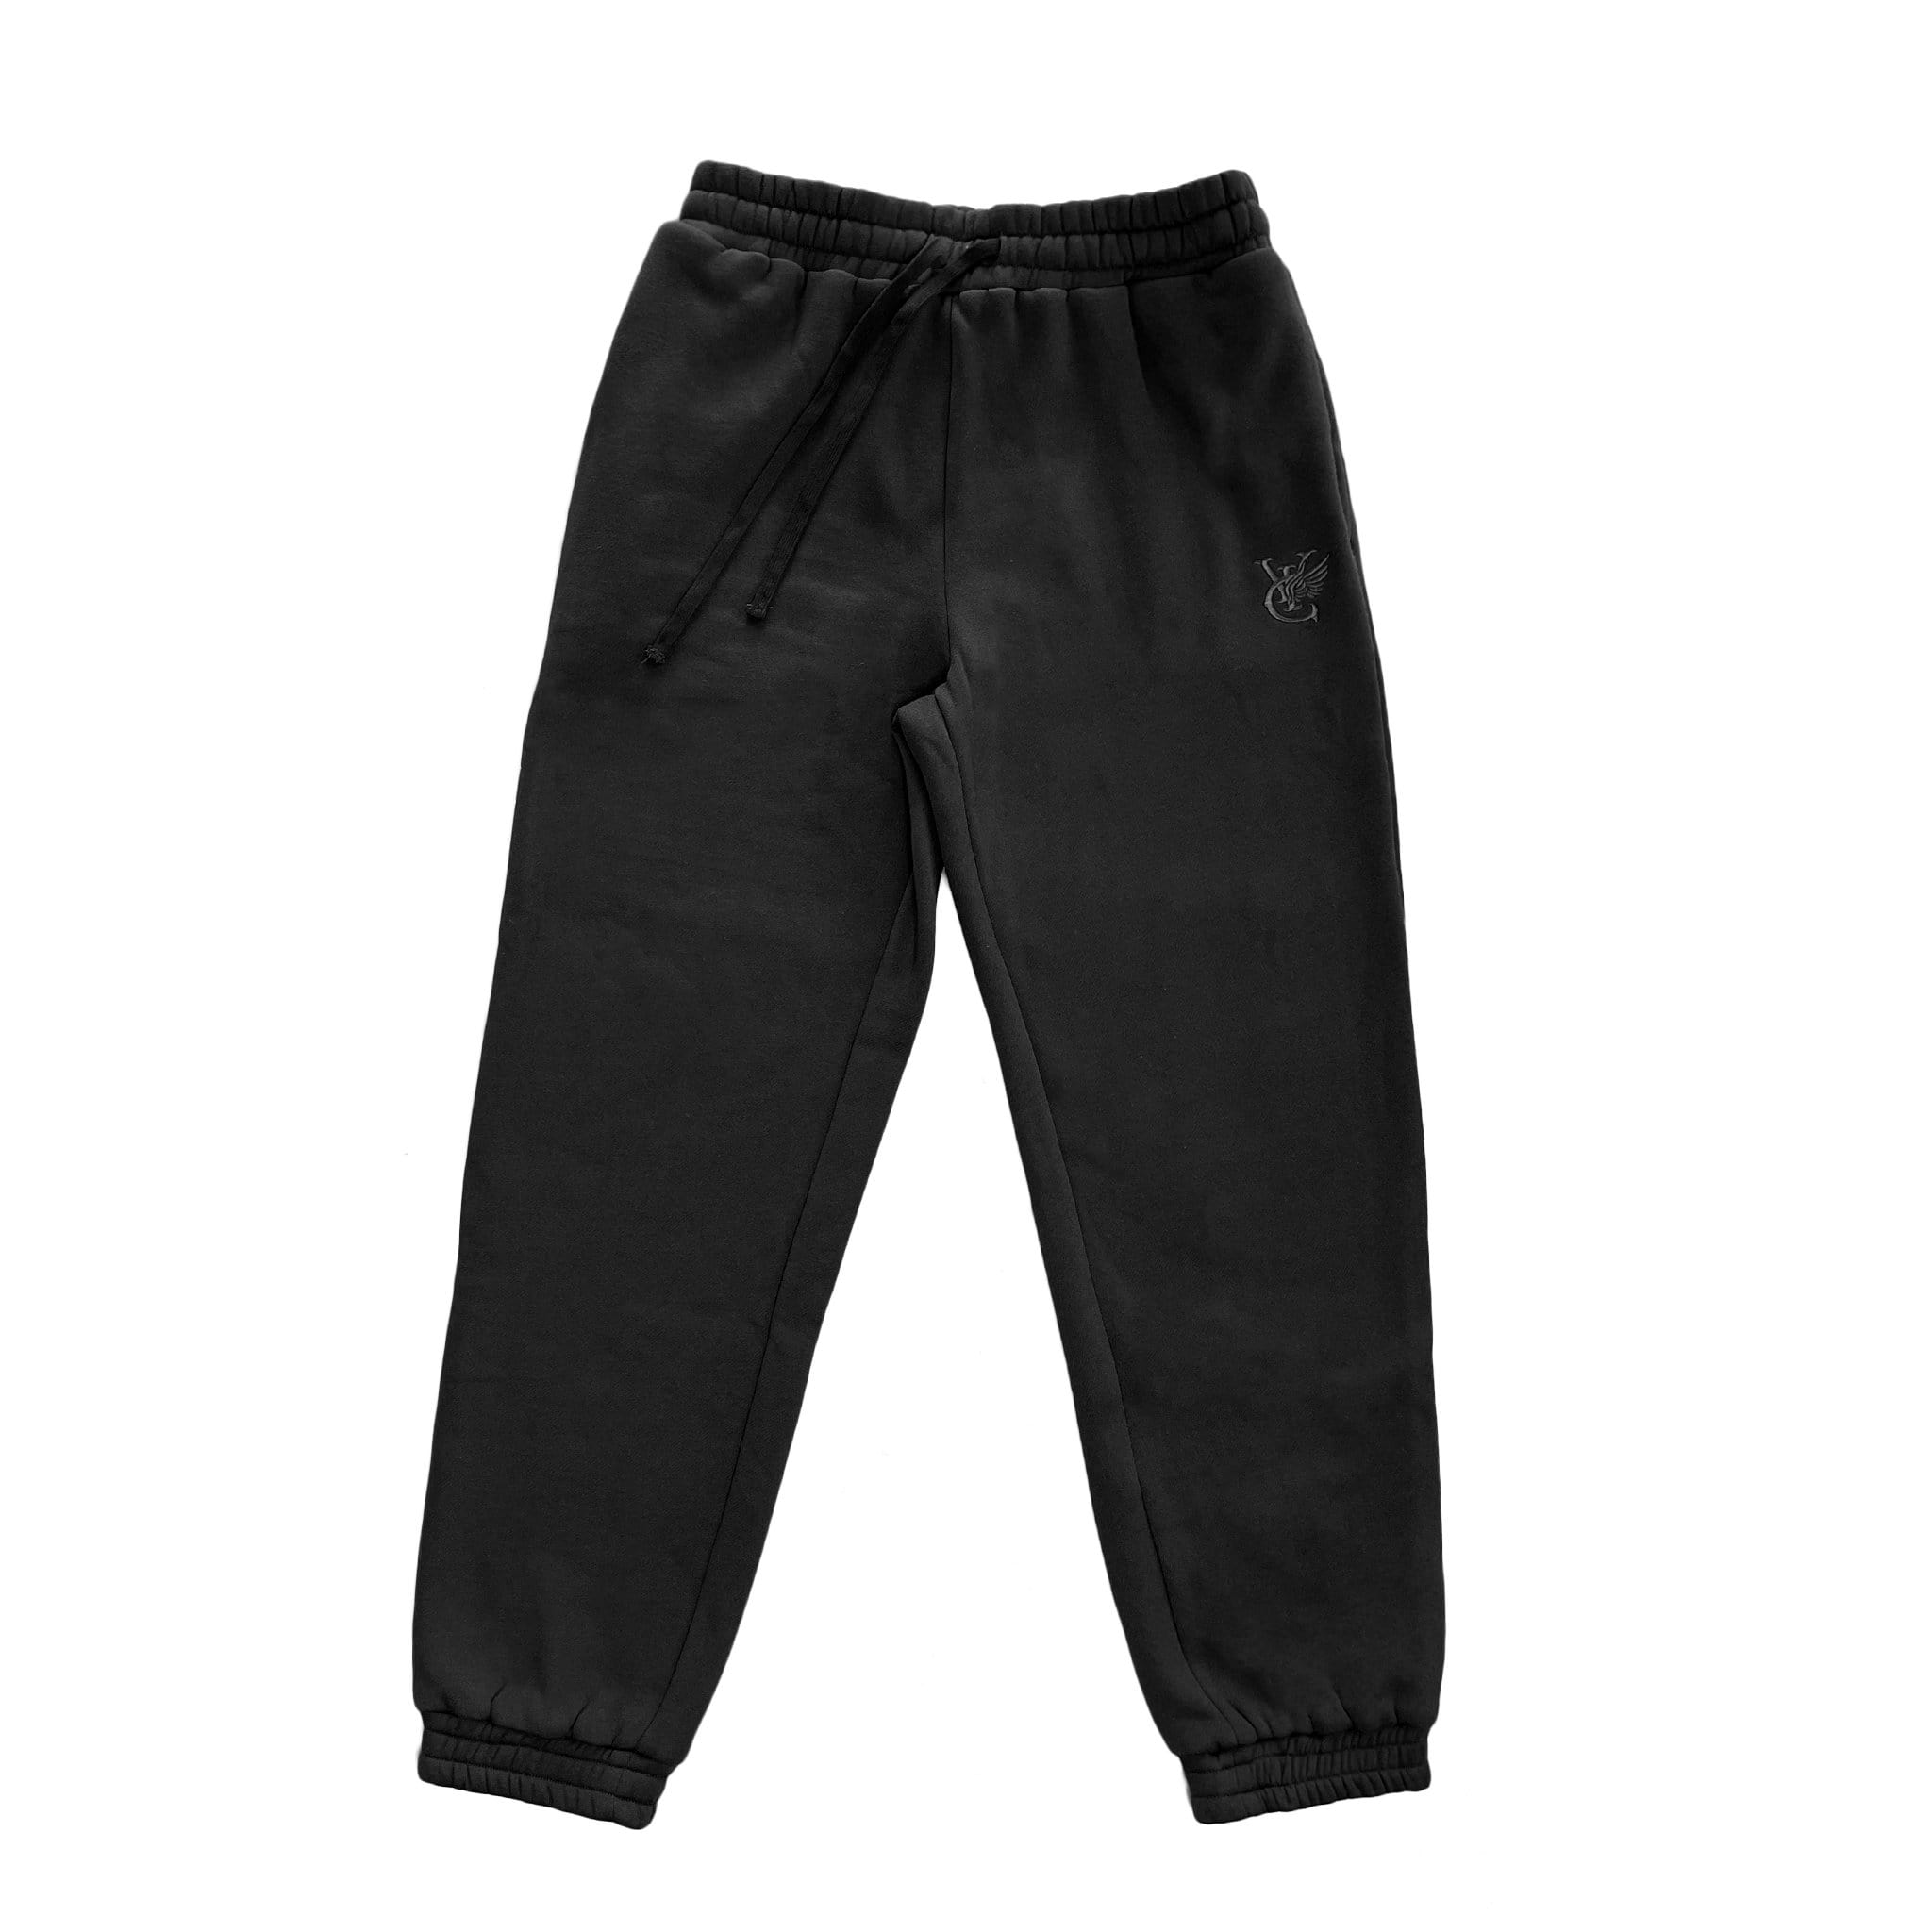 Premium quality heavyweight sweatpants by New Zealand skate and streetwear clothing label VIC Apparel. Classic minimal design.